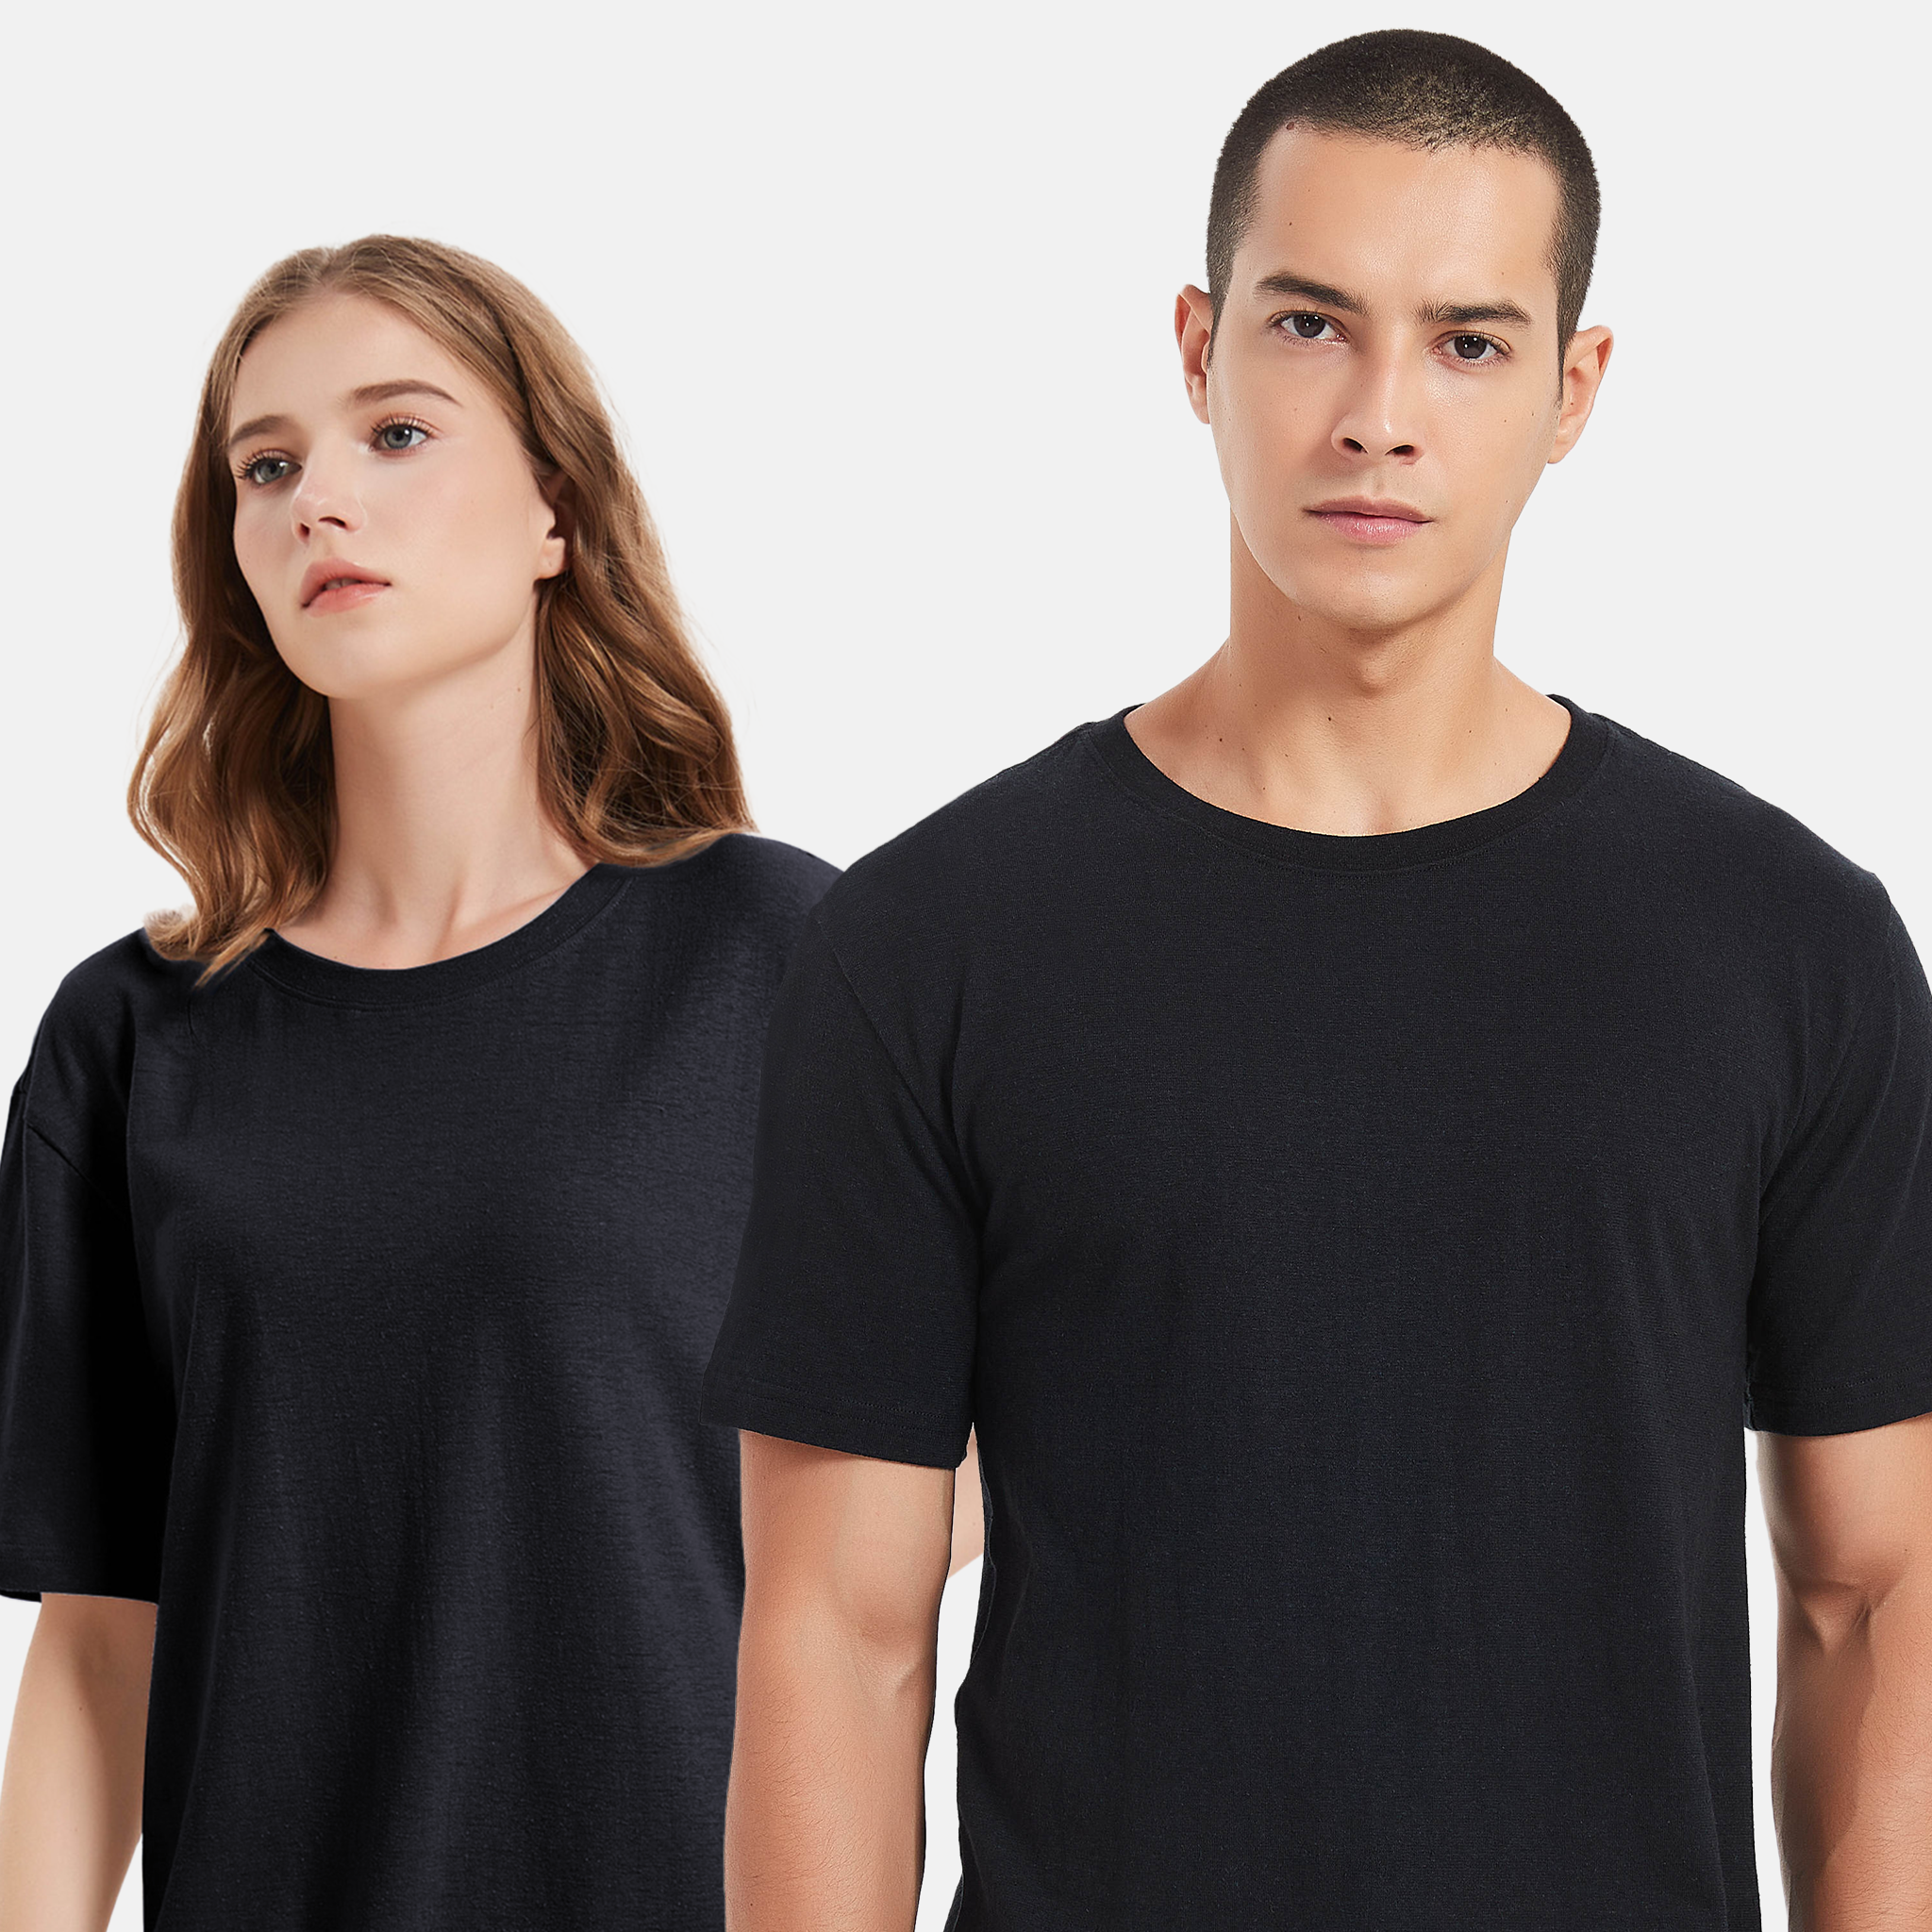 Organic cotton black t-shirt, sustainably sourced, eco-friendly, Mens and Womens